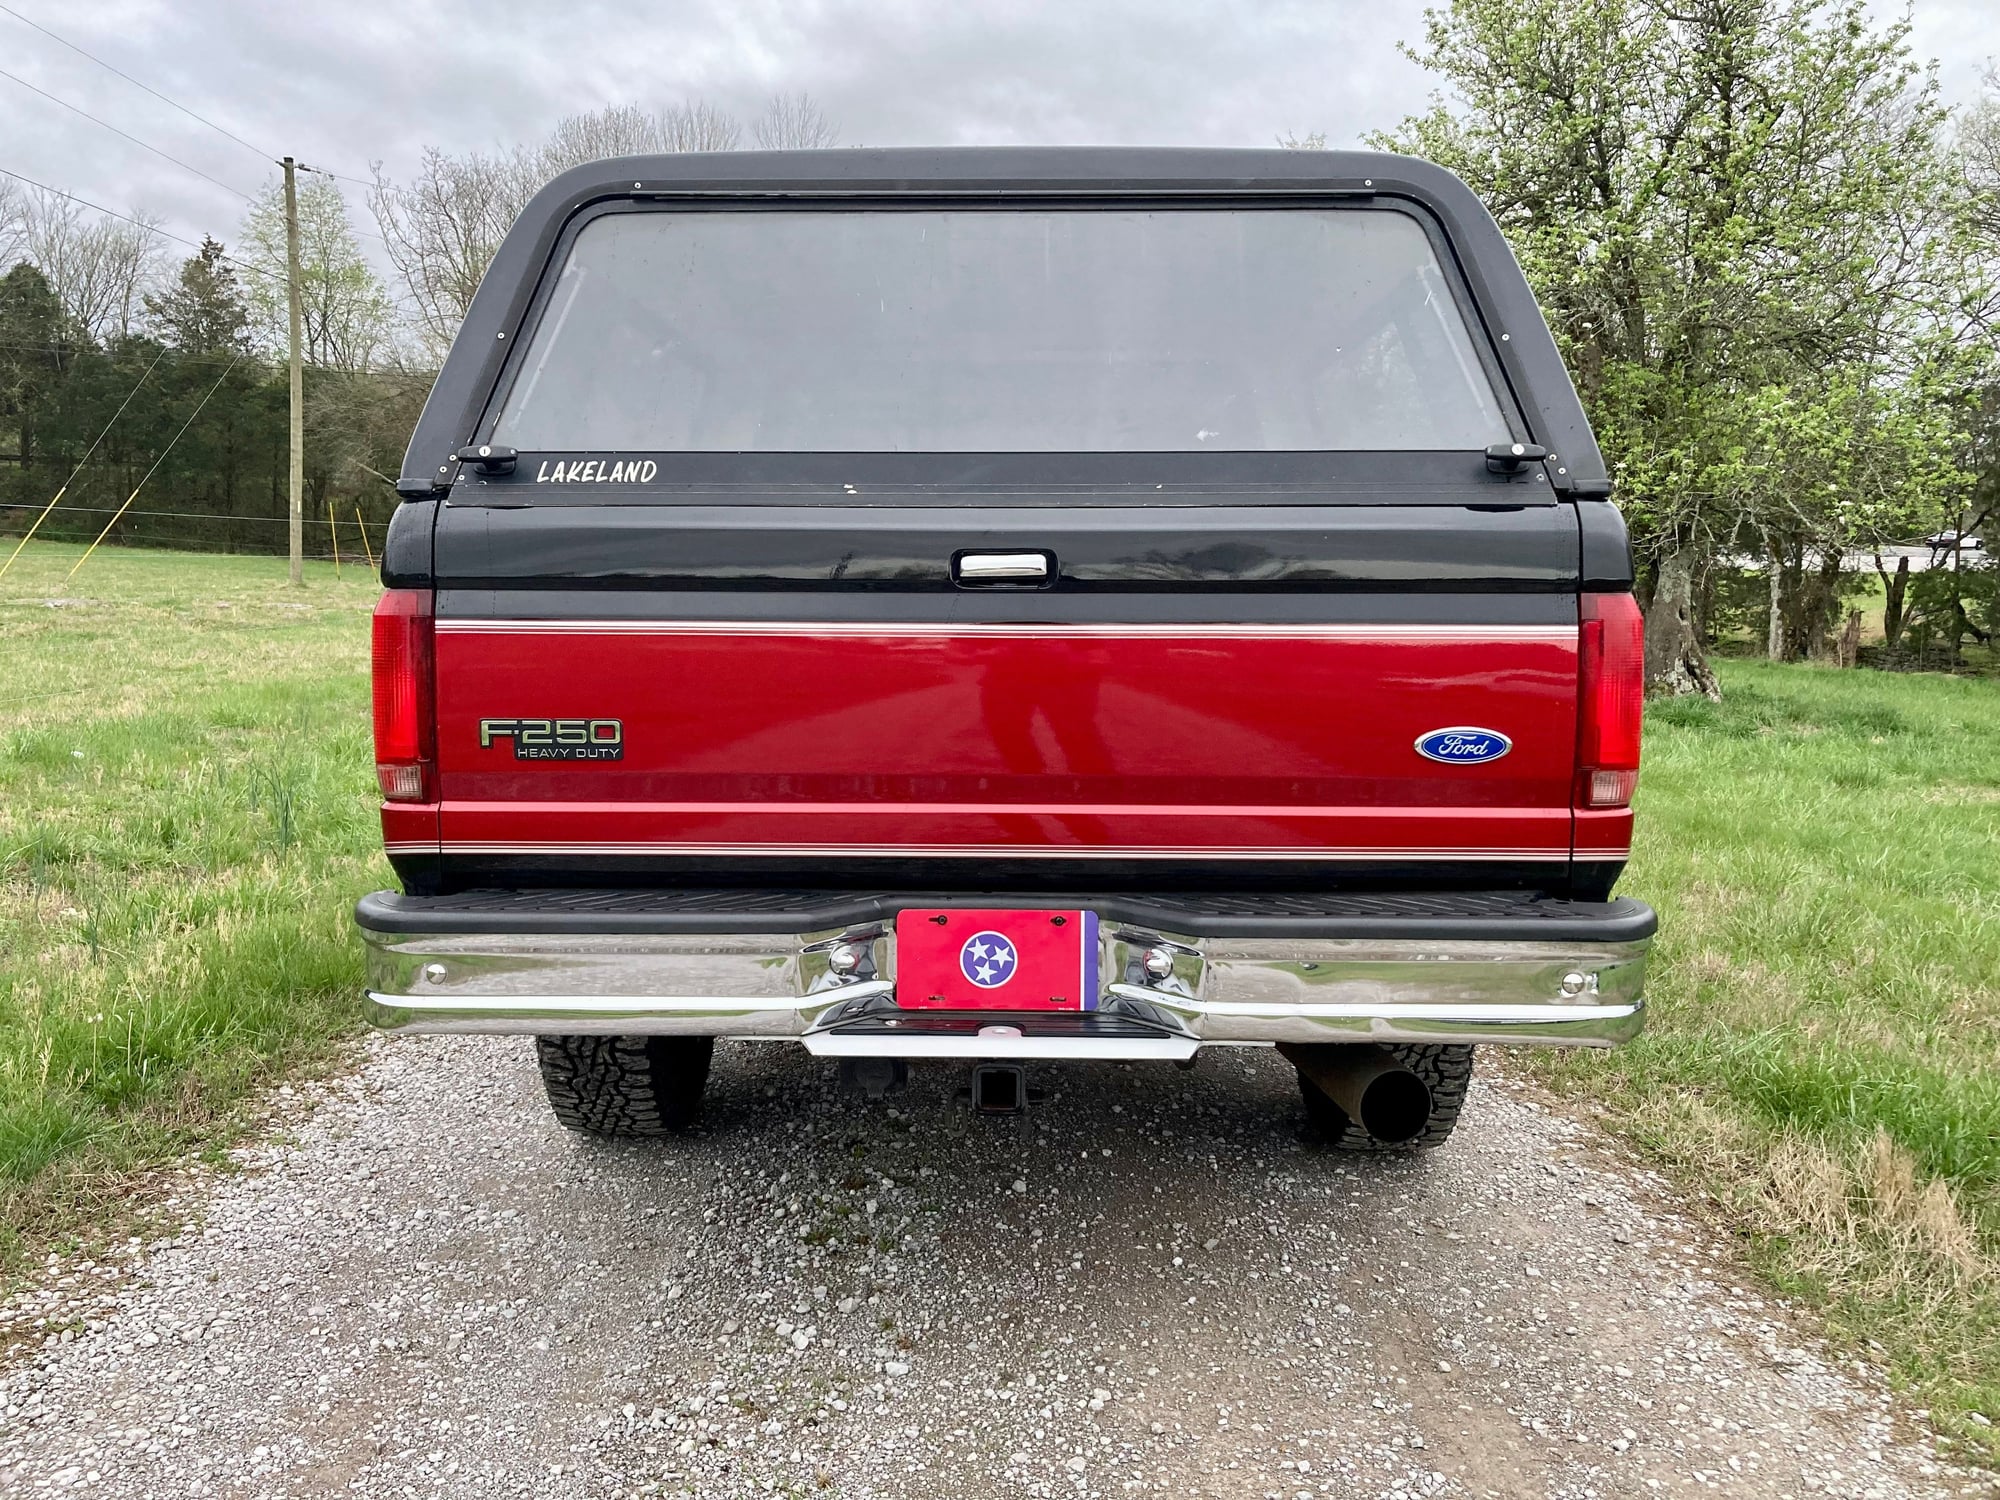 1996 Ford F-250 - Mint Crew-cab short-bed - Used - VIN 1fthw26f1vec62788 - 158,000 Miles - 8 cyl - 4WD - Automatic - Truck - Black - Gordonsville, TN 38563, United States